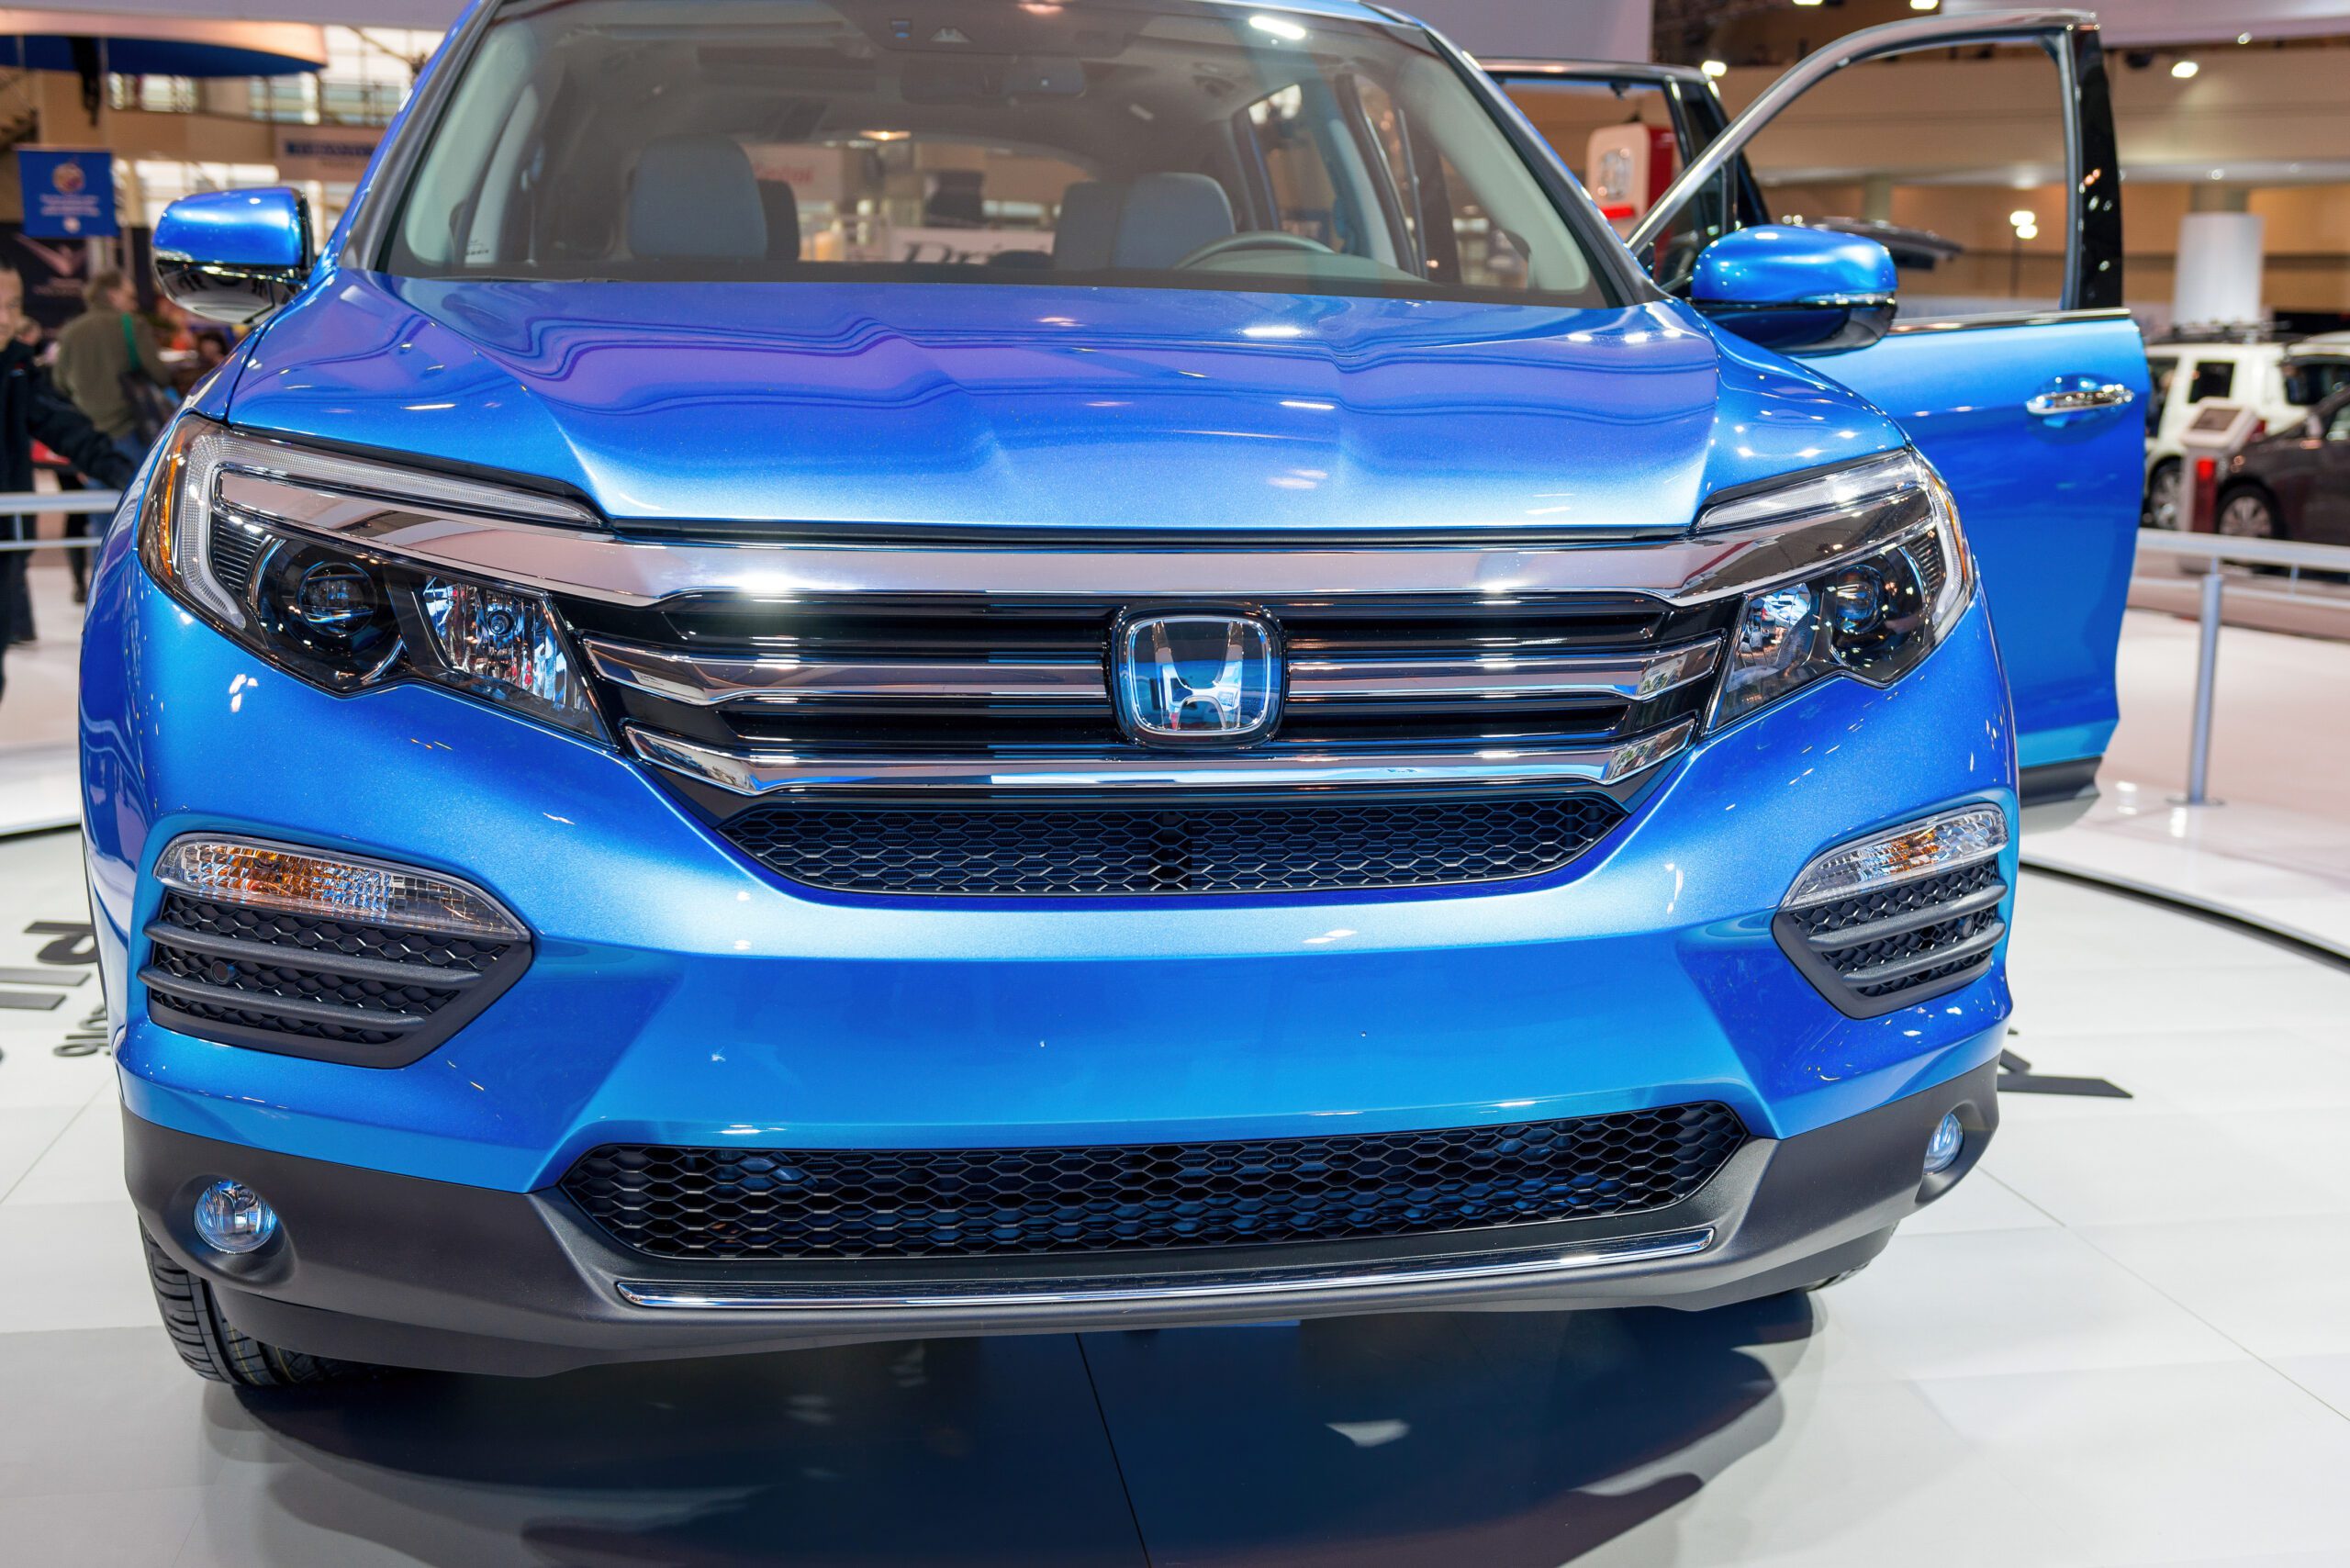 Plaintiffs allege that due to a manufacturing defect, sunroofs and moonroofs in 2015-2022 Honda and Acura vehicles are prone to sudden explosion.